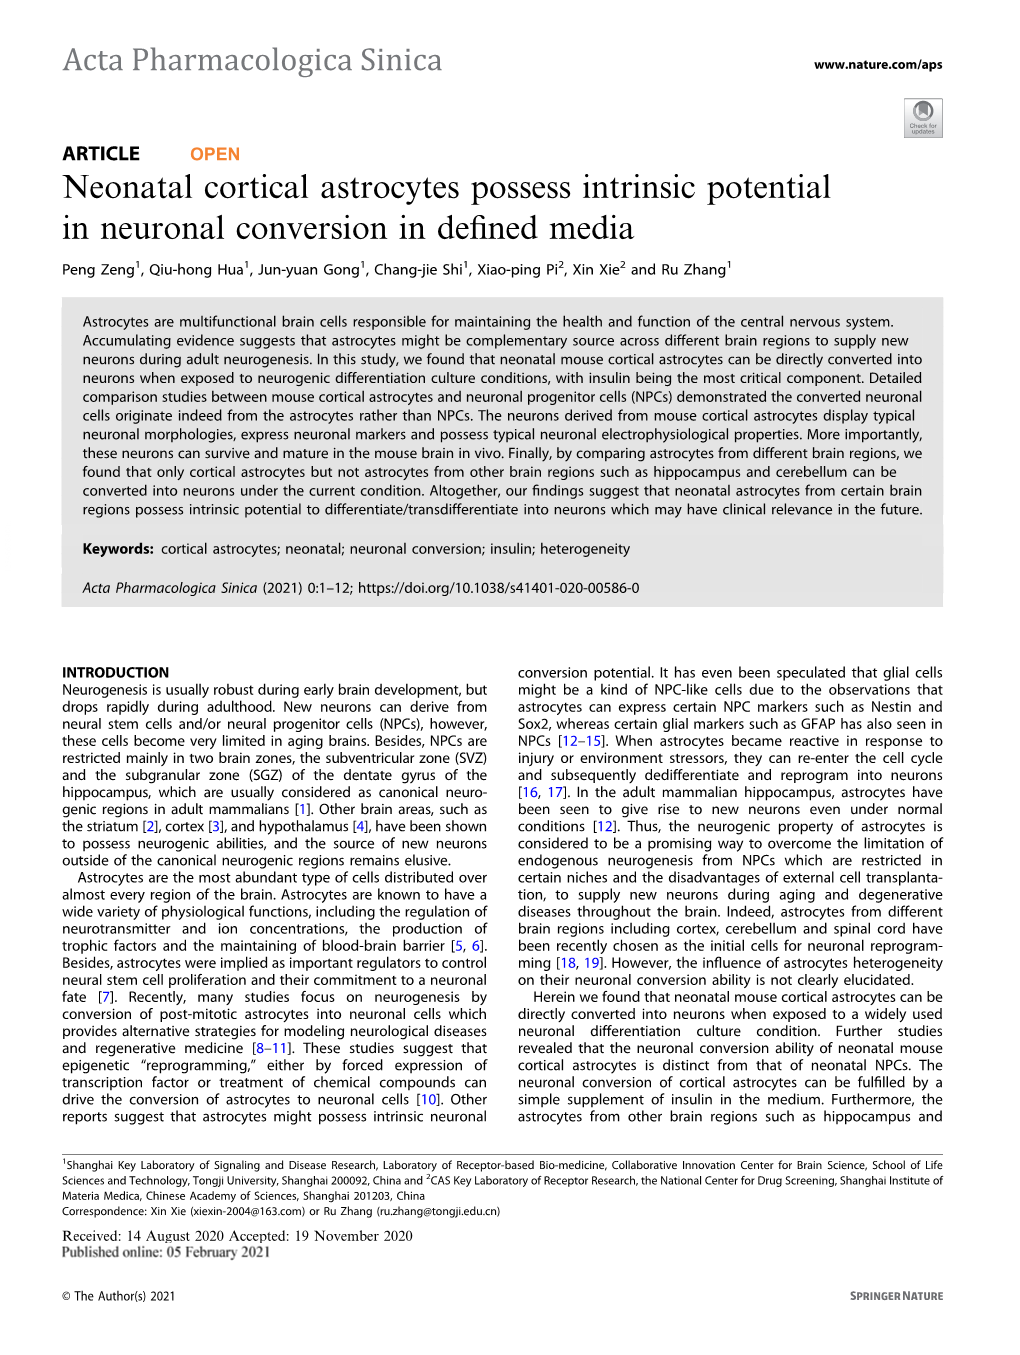 Neonatal Cortical Astrocytes Possess Intrinsic Potential in Neuronal Conversion in Deﬁned Media